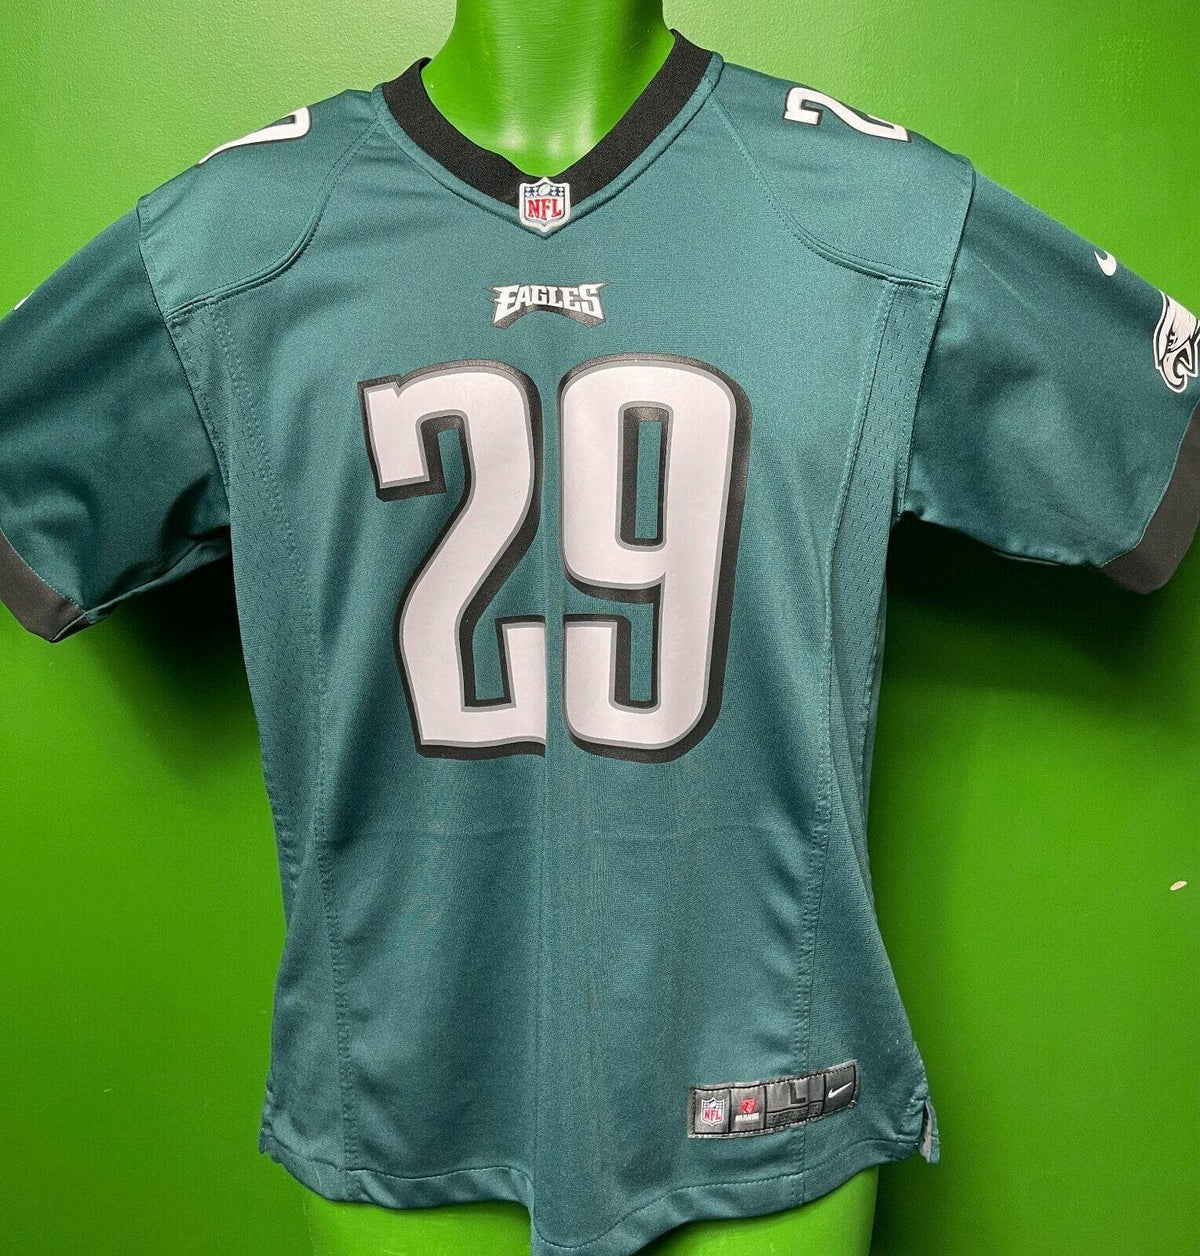 NFL Philadelphia Eagles Murray #29 Game Jersey Youth Large 14-16